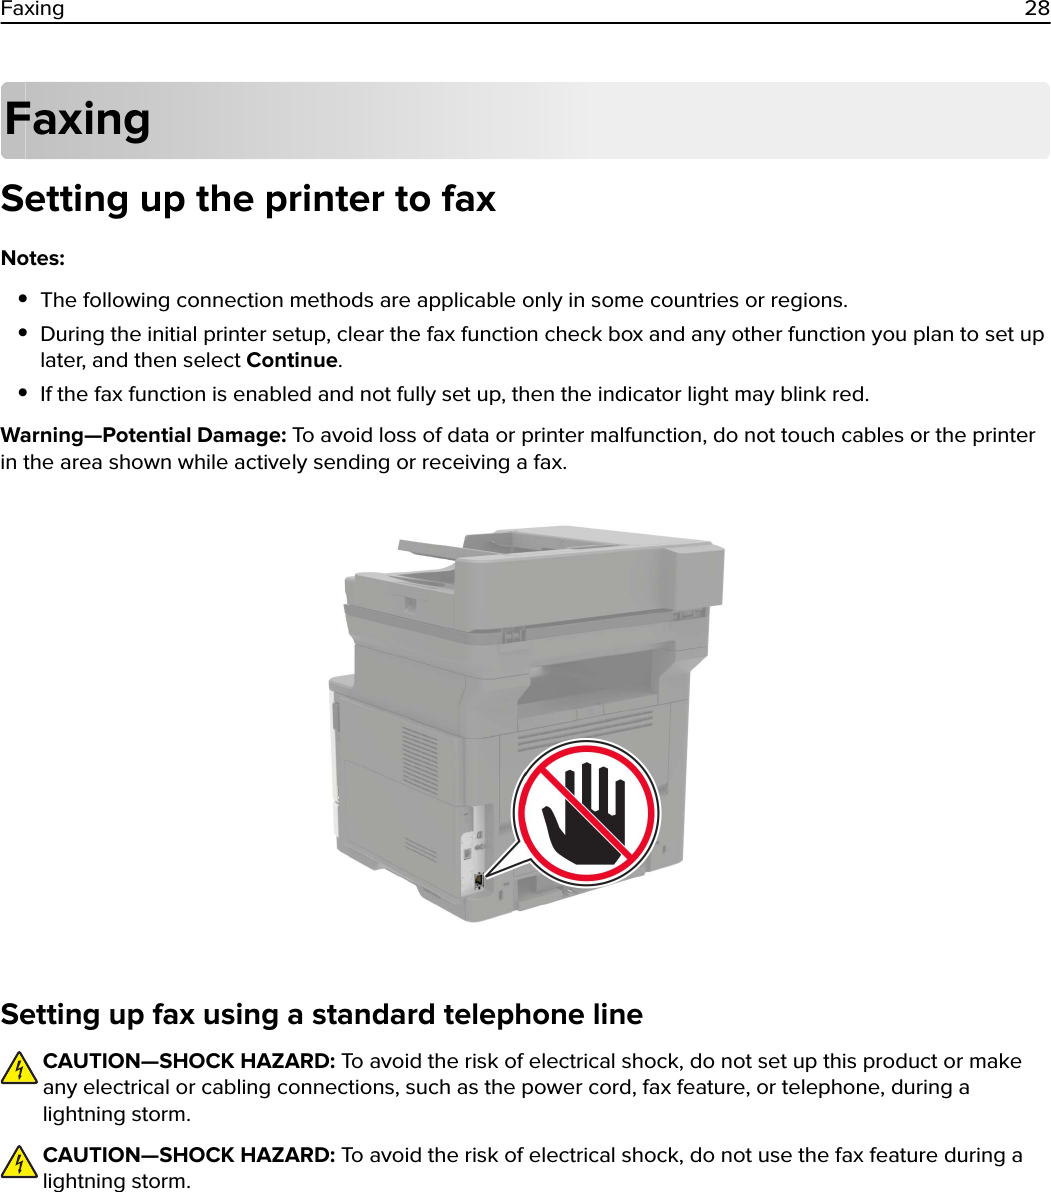 FaxingSetting up the printer to faxNotes:•The following connection methods are applicable only in some countries or regions.•During the initial printer setup, clear the fax function check box and any other function you plan to set uplater, and then select Continue.•If the fax function is enabled and not fully set up, then the indicator light may blink red.Warning—Potential Damage: To avoid loss of data or printer malfunction, do not touch cables or the printerin the area shown while actively sending or receiving a fax.Setting up fax using a standard telephone lineCAUTION—SHOCK HAZARD: To avoid the risk of electrical shock, do not set up this product or makeany electrical or cabling connections, such as the power cord, fax feature, or telephone, during alightning storm.CAUTION—SHOCK HAZARD: To avoid the risk of electrical shock, do not use the fax feature during alightning storm.Faxing 28